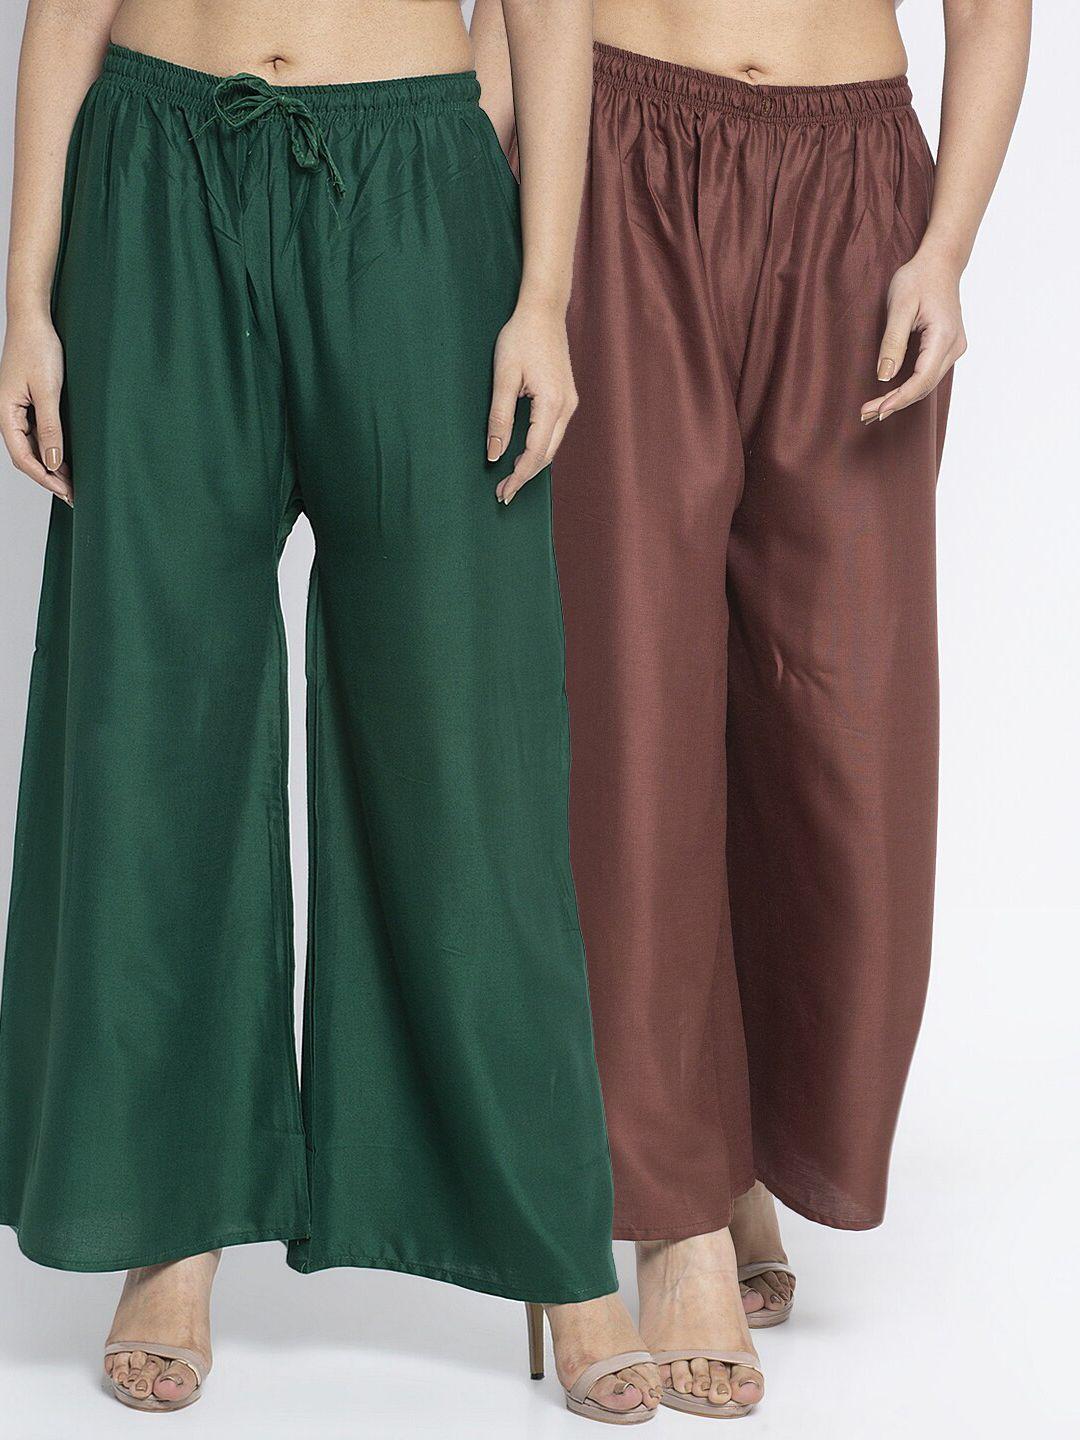 gracit women pack of 2 green & brown ethnic palazzos